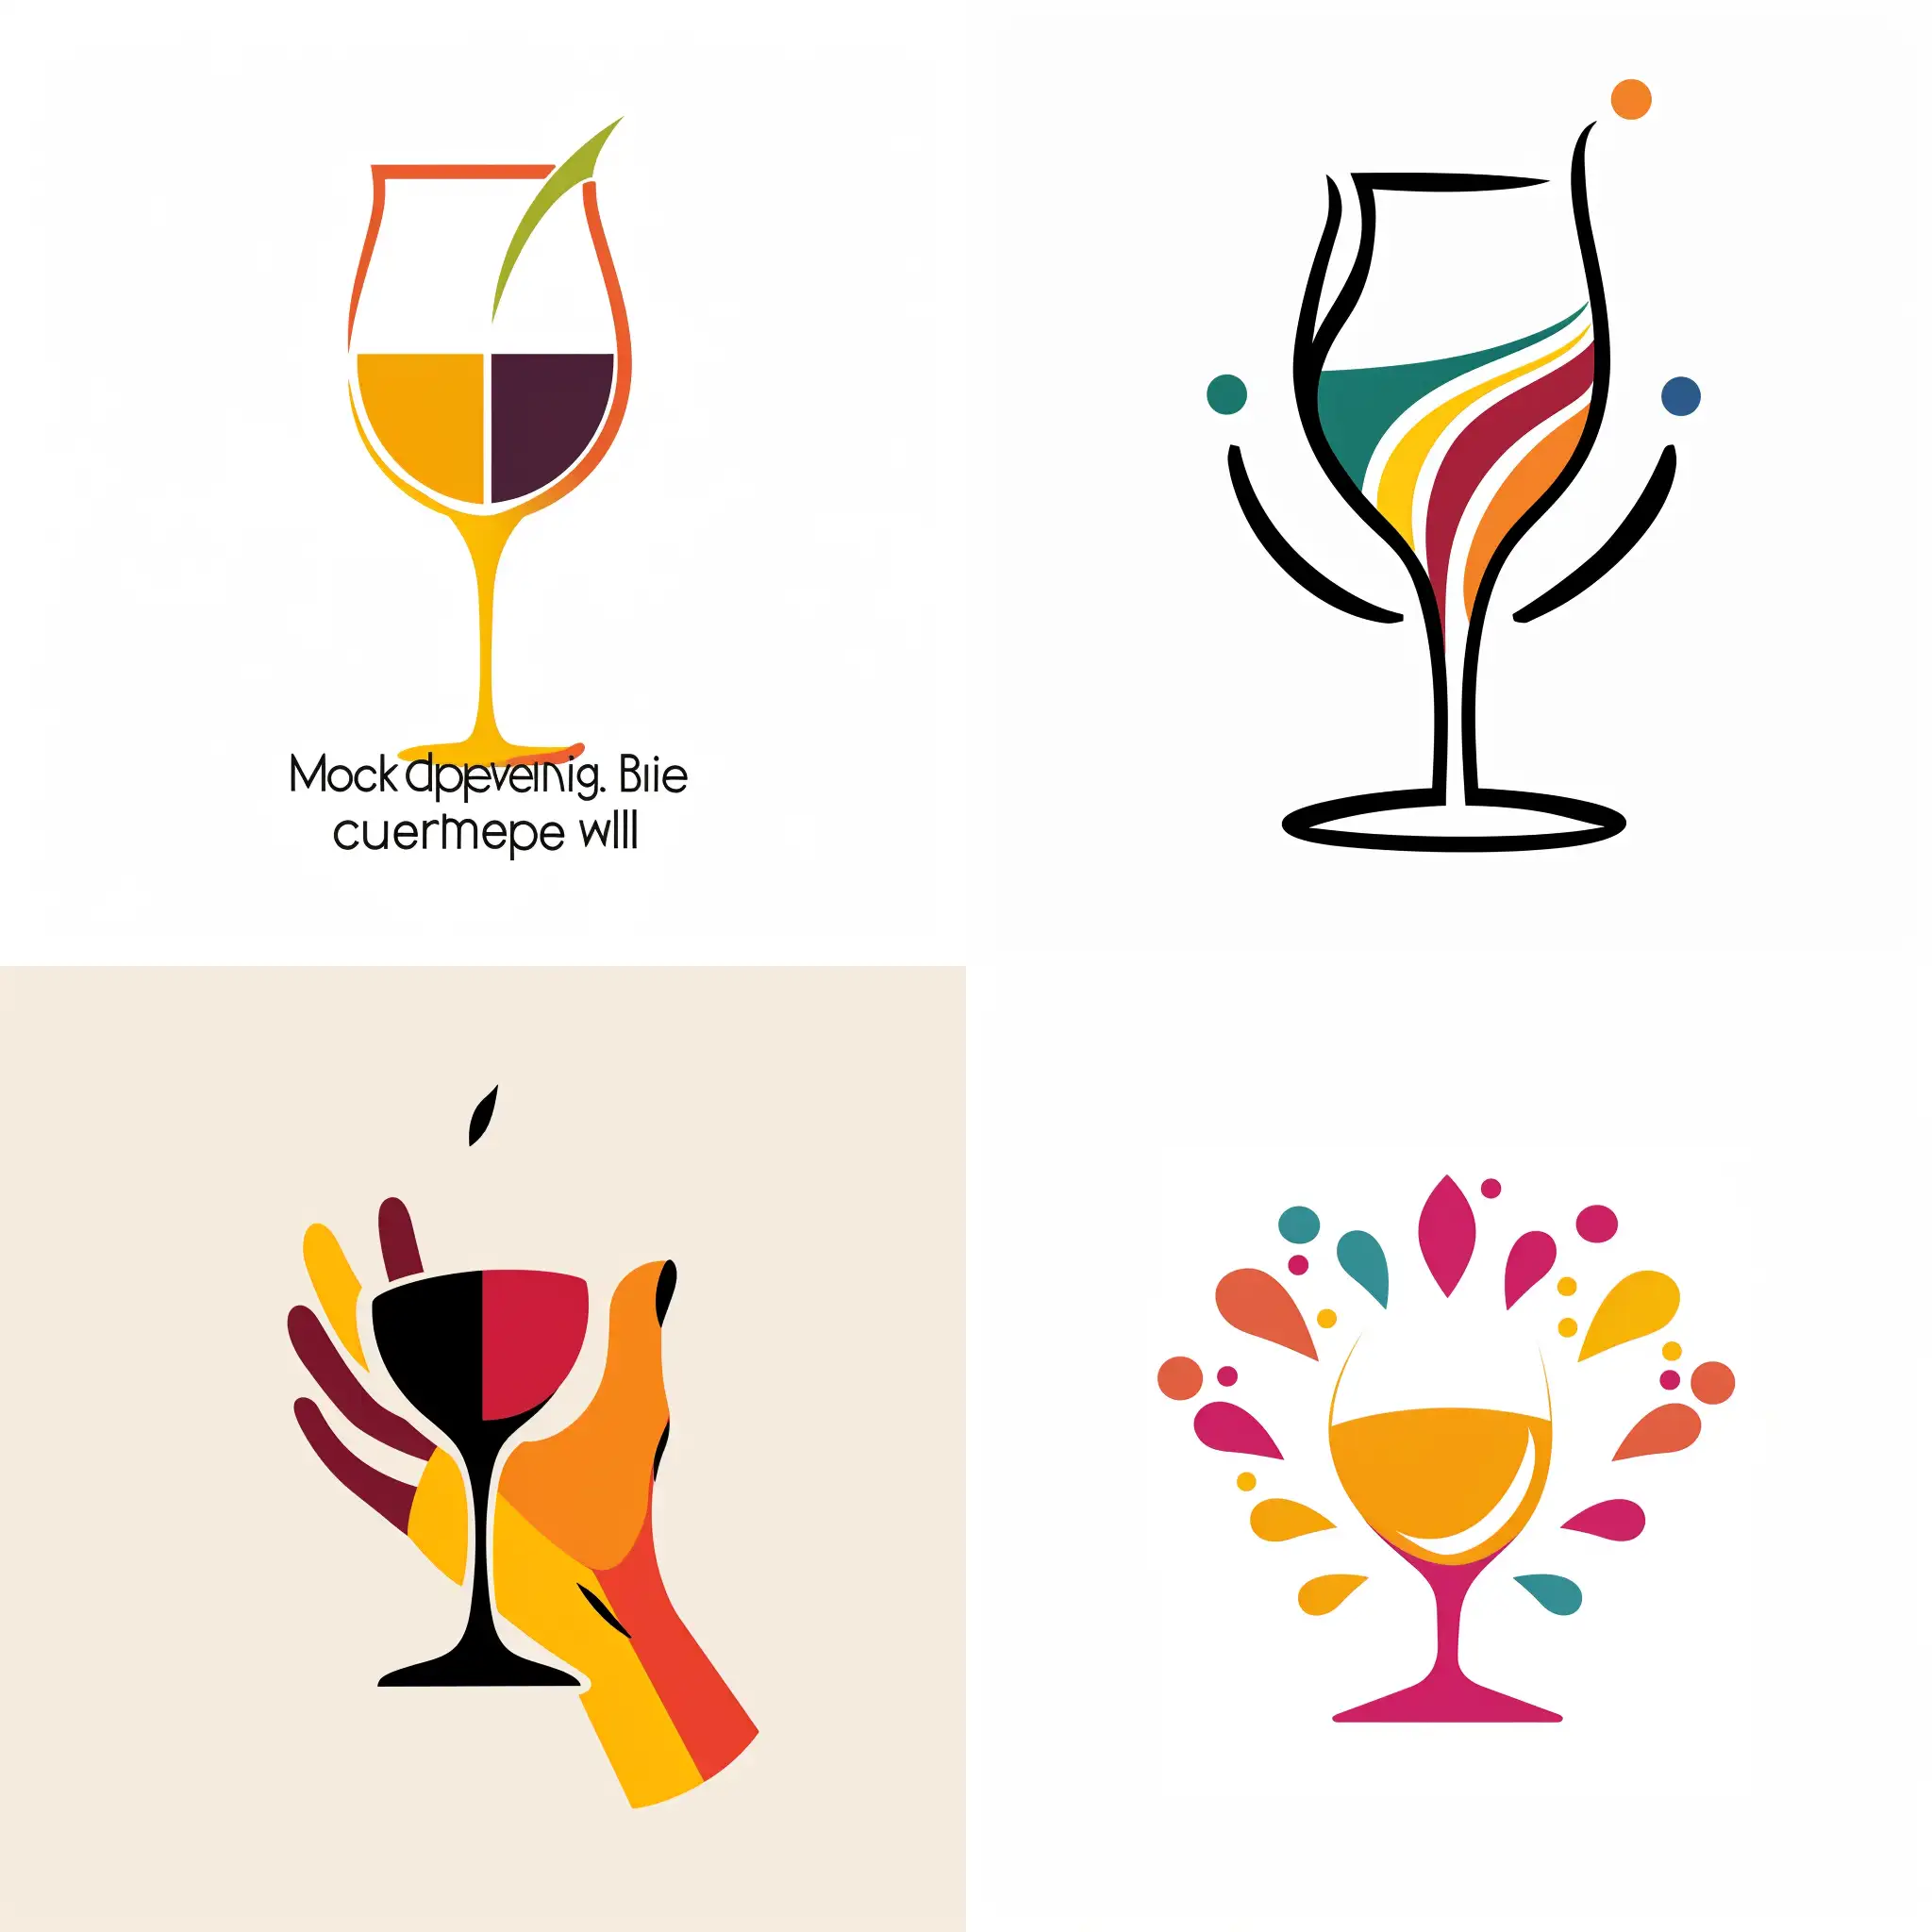 I'd like a logo form my new non-profit. topic: making wine accessible and inclusive for all. I'd like something simple, funky, fun, and recognizable